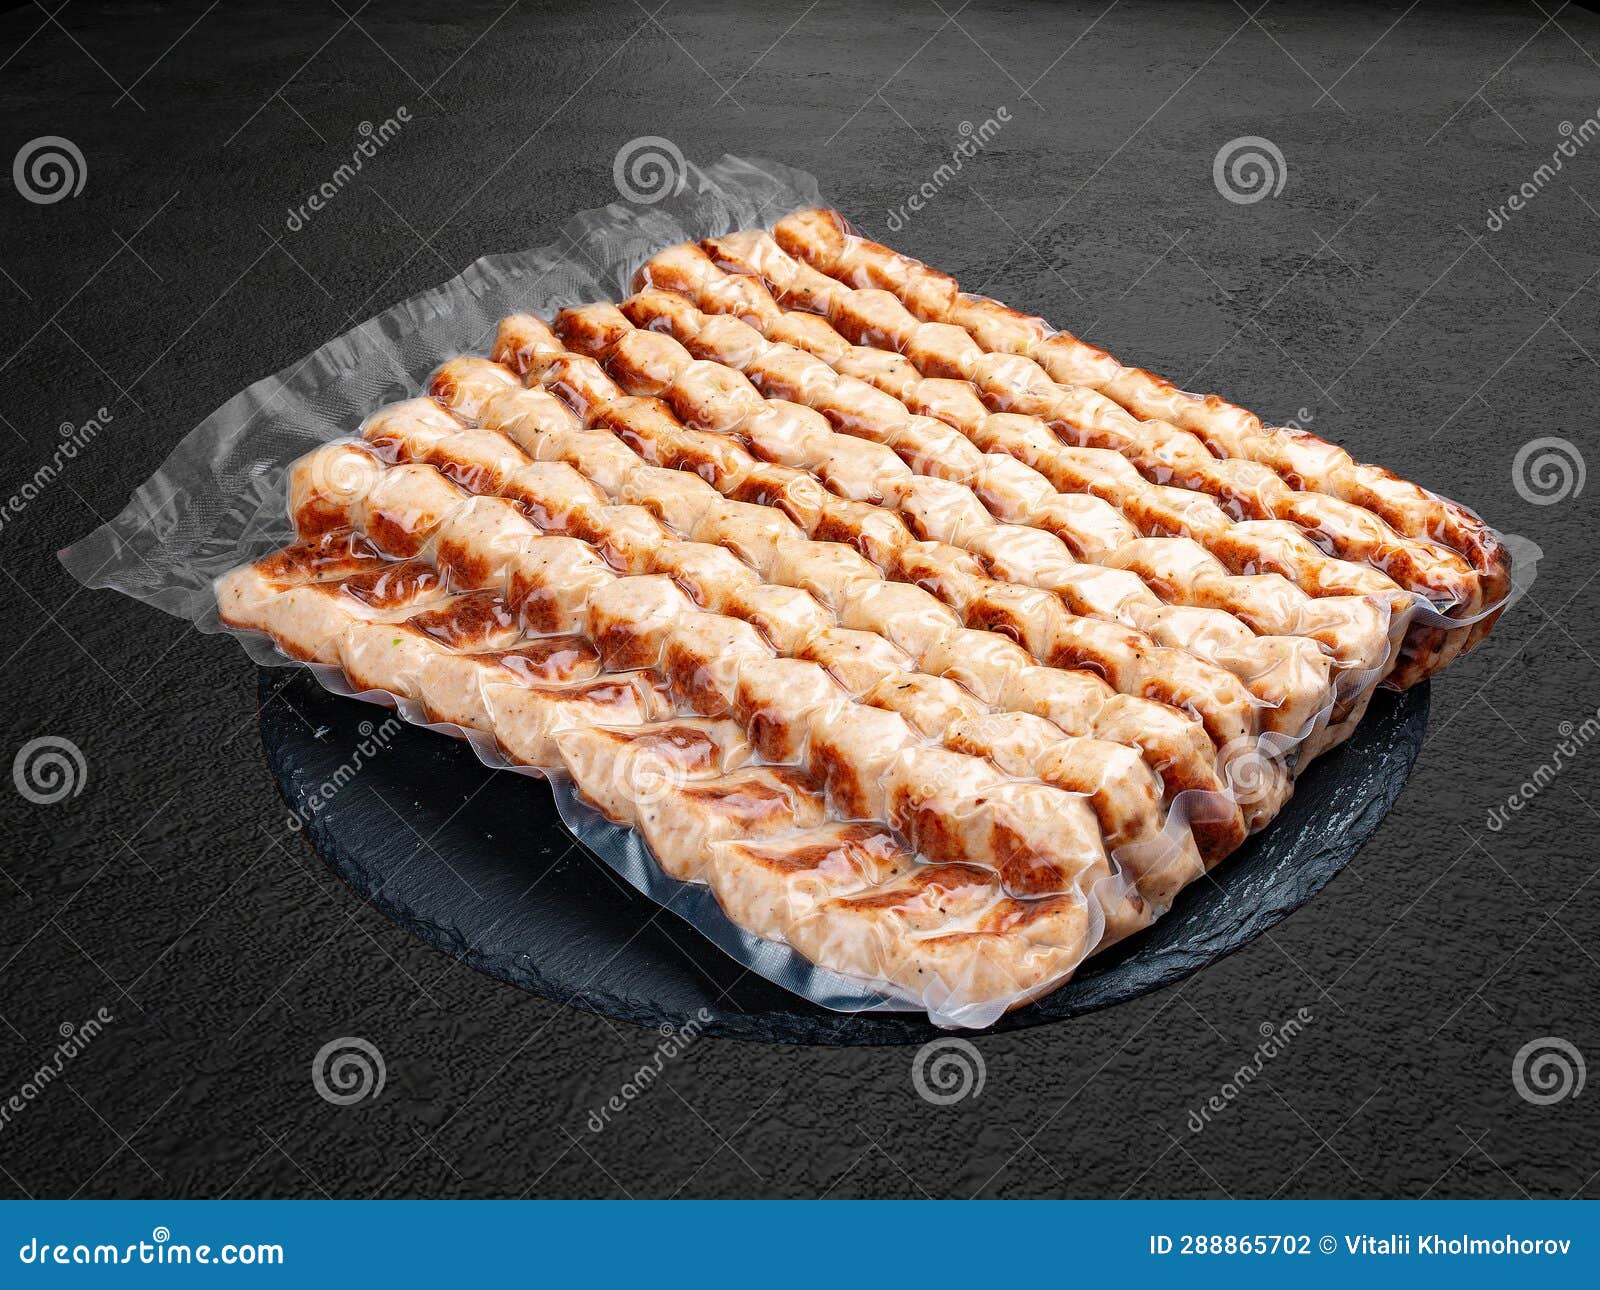 grilled chicken lulas. vacuum-packed minced meat products.  on a dark background